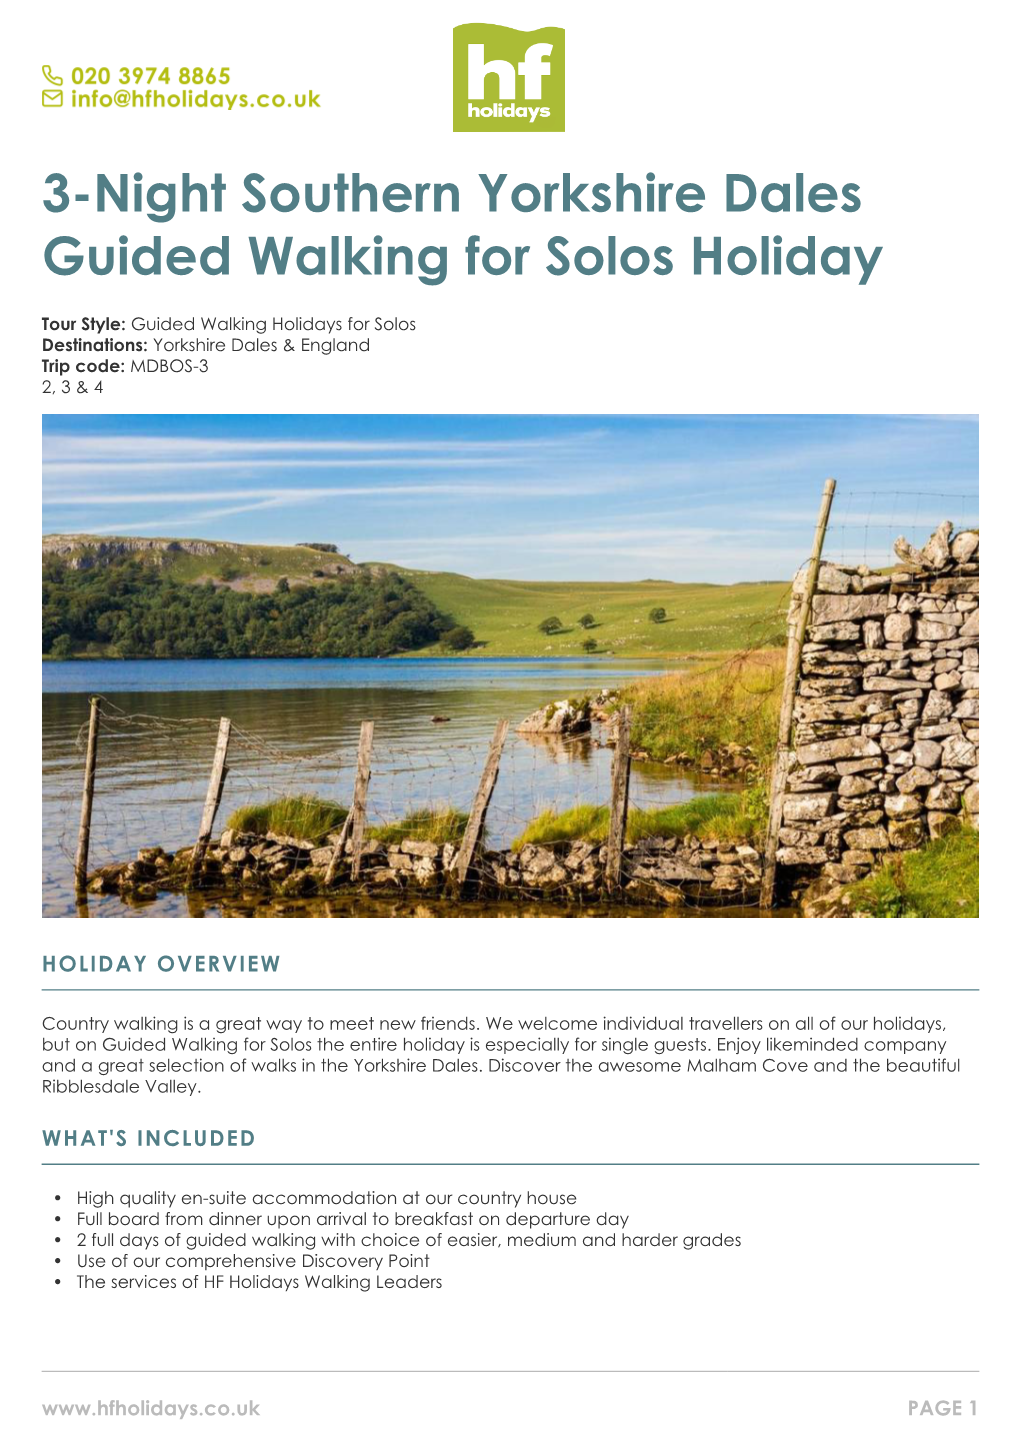 3-Night Southern Yorkshire Dales Guided Walking for Solos Holiday